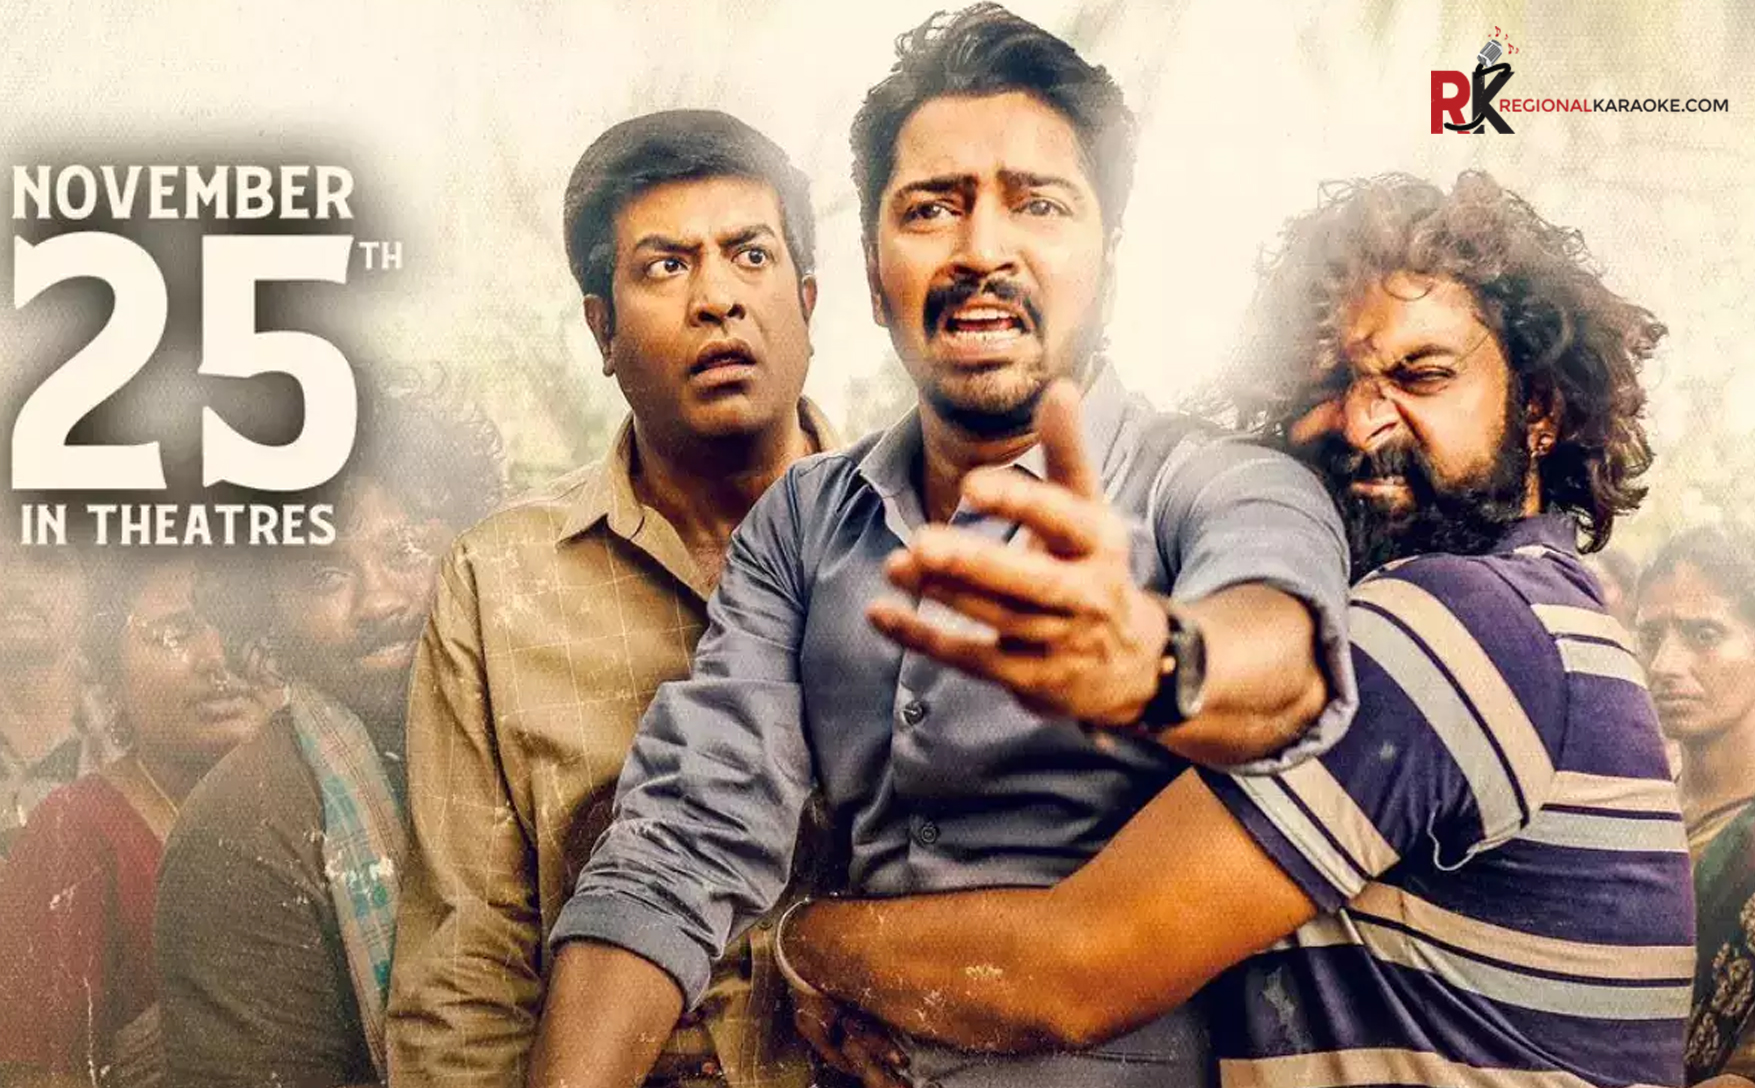 Allari Naresh plays a government officer visiting the tribal area as an election officer